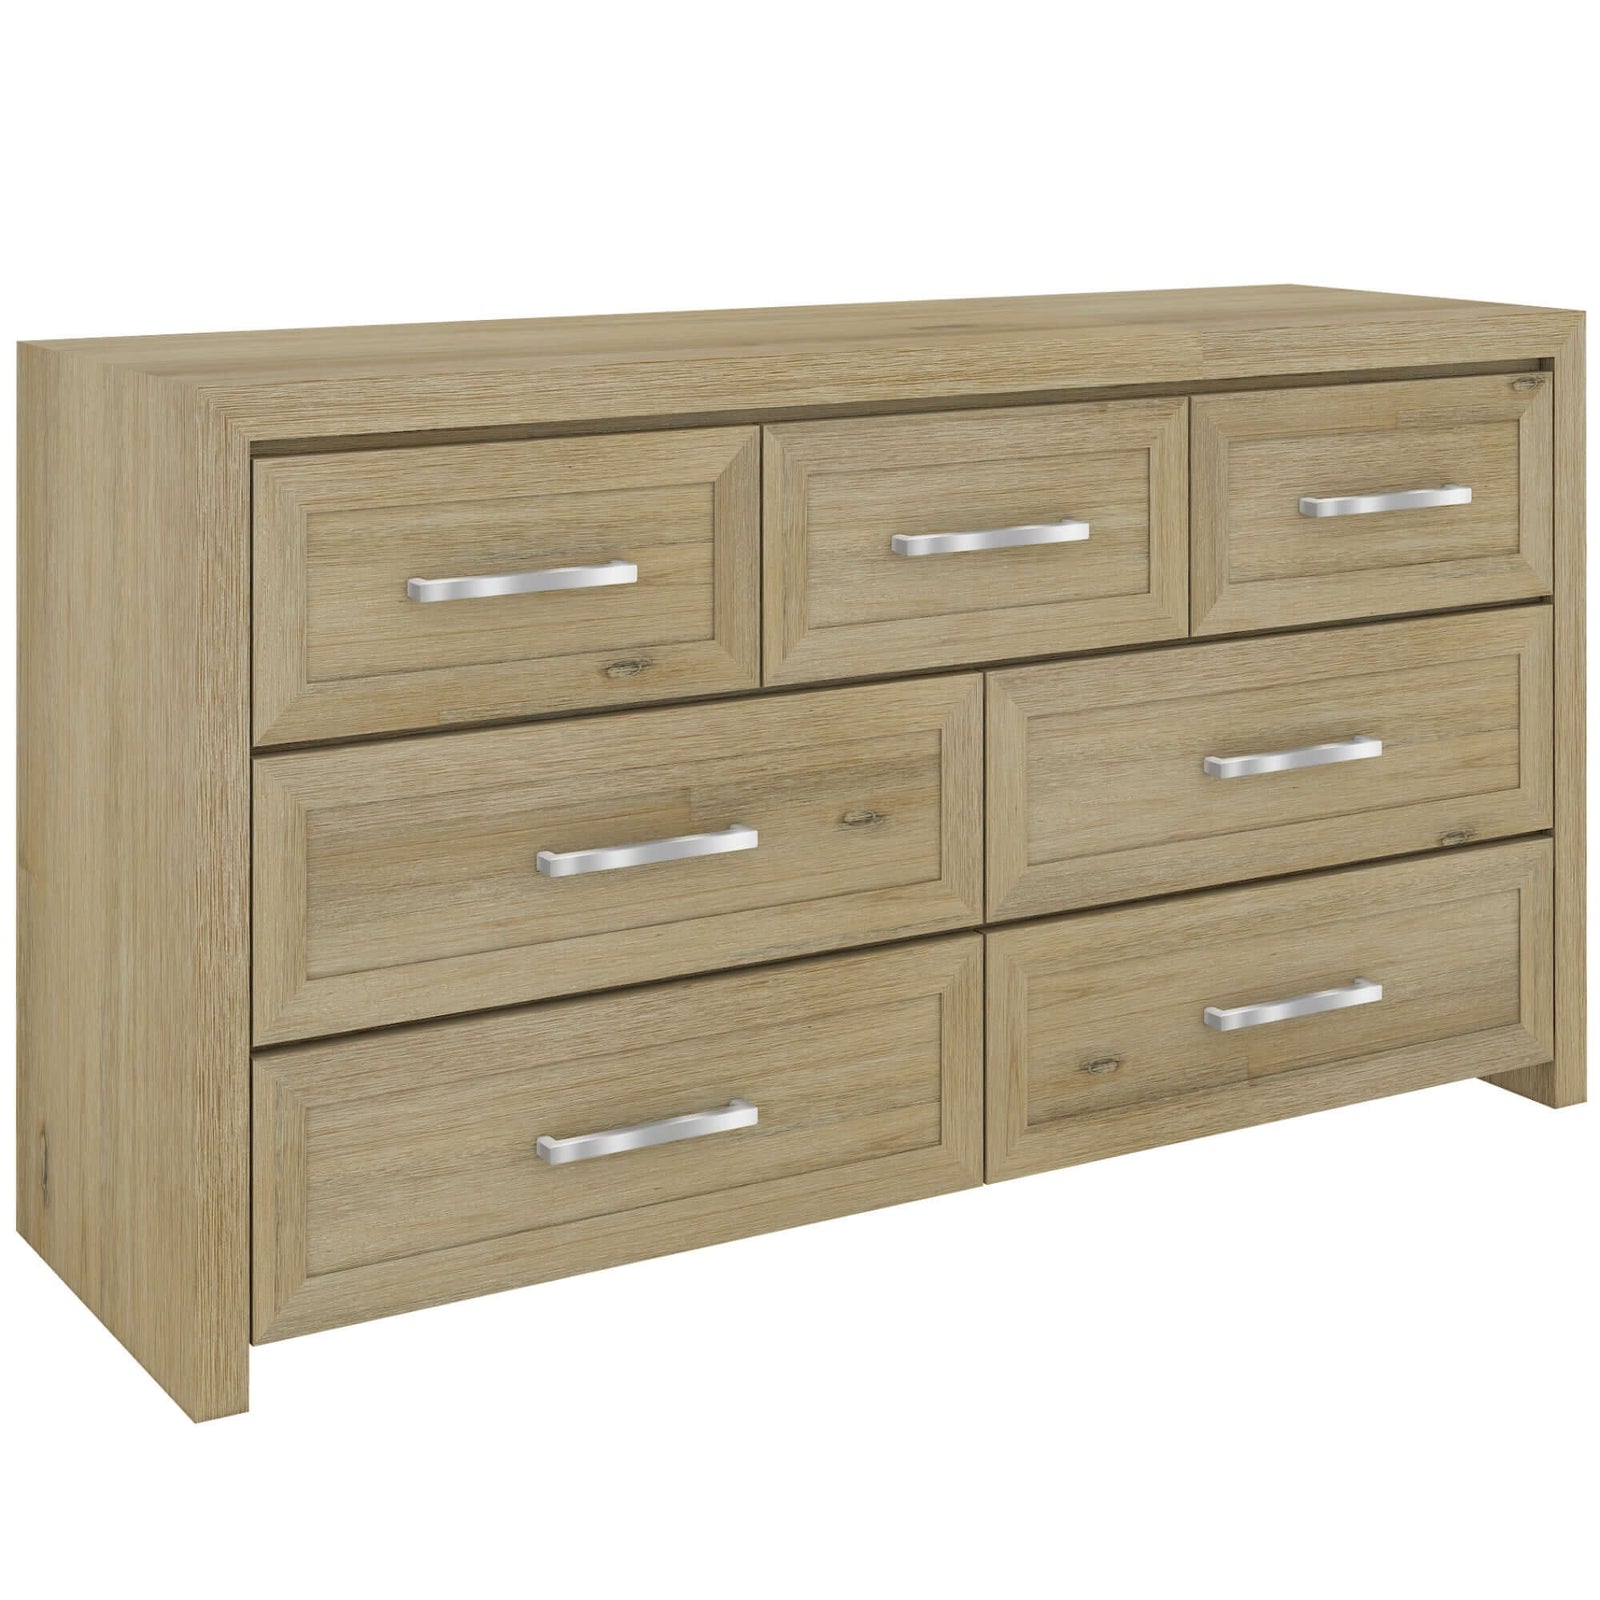 Gracelyn Dresser 7 Chest of Drawers Solid Wood Bedroom Storage Cabinet - Smoke-Upinteriors